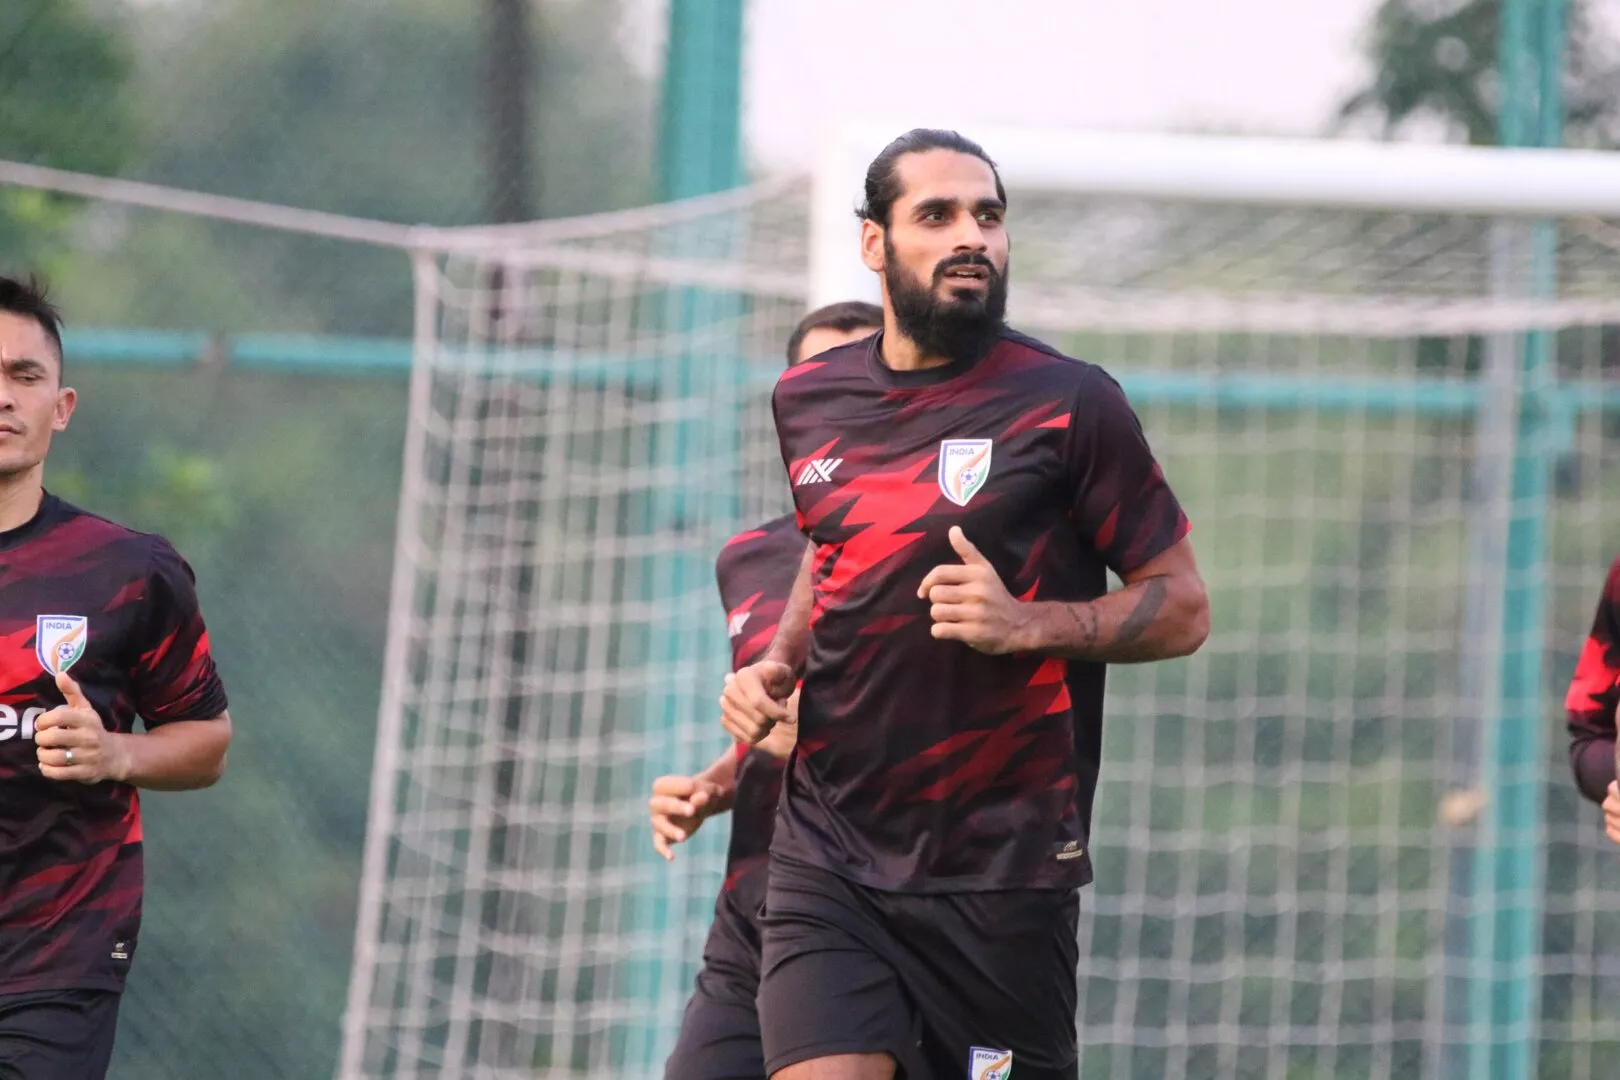 Important to move up the ranking to get better pot for WC Qualifiers: Sandesh Jhingan